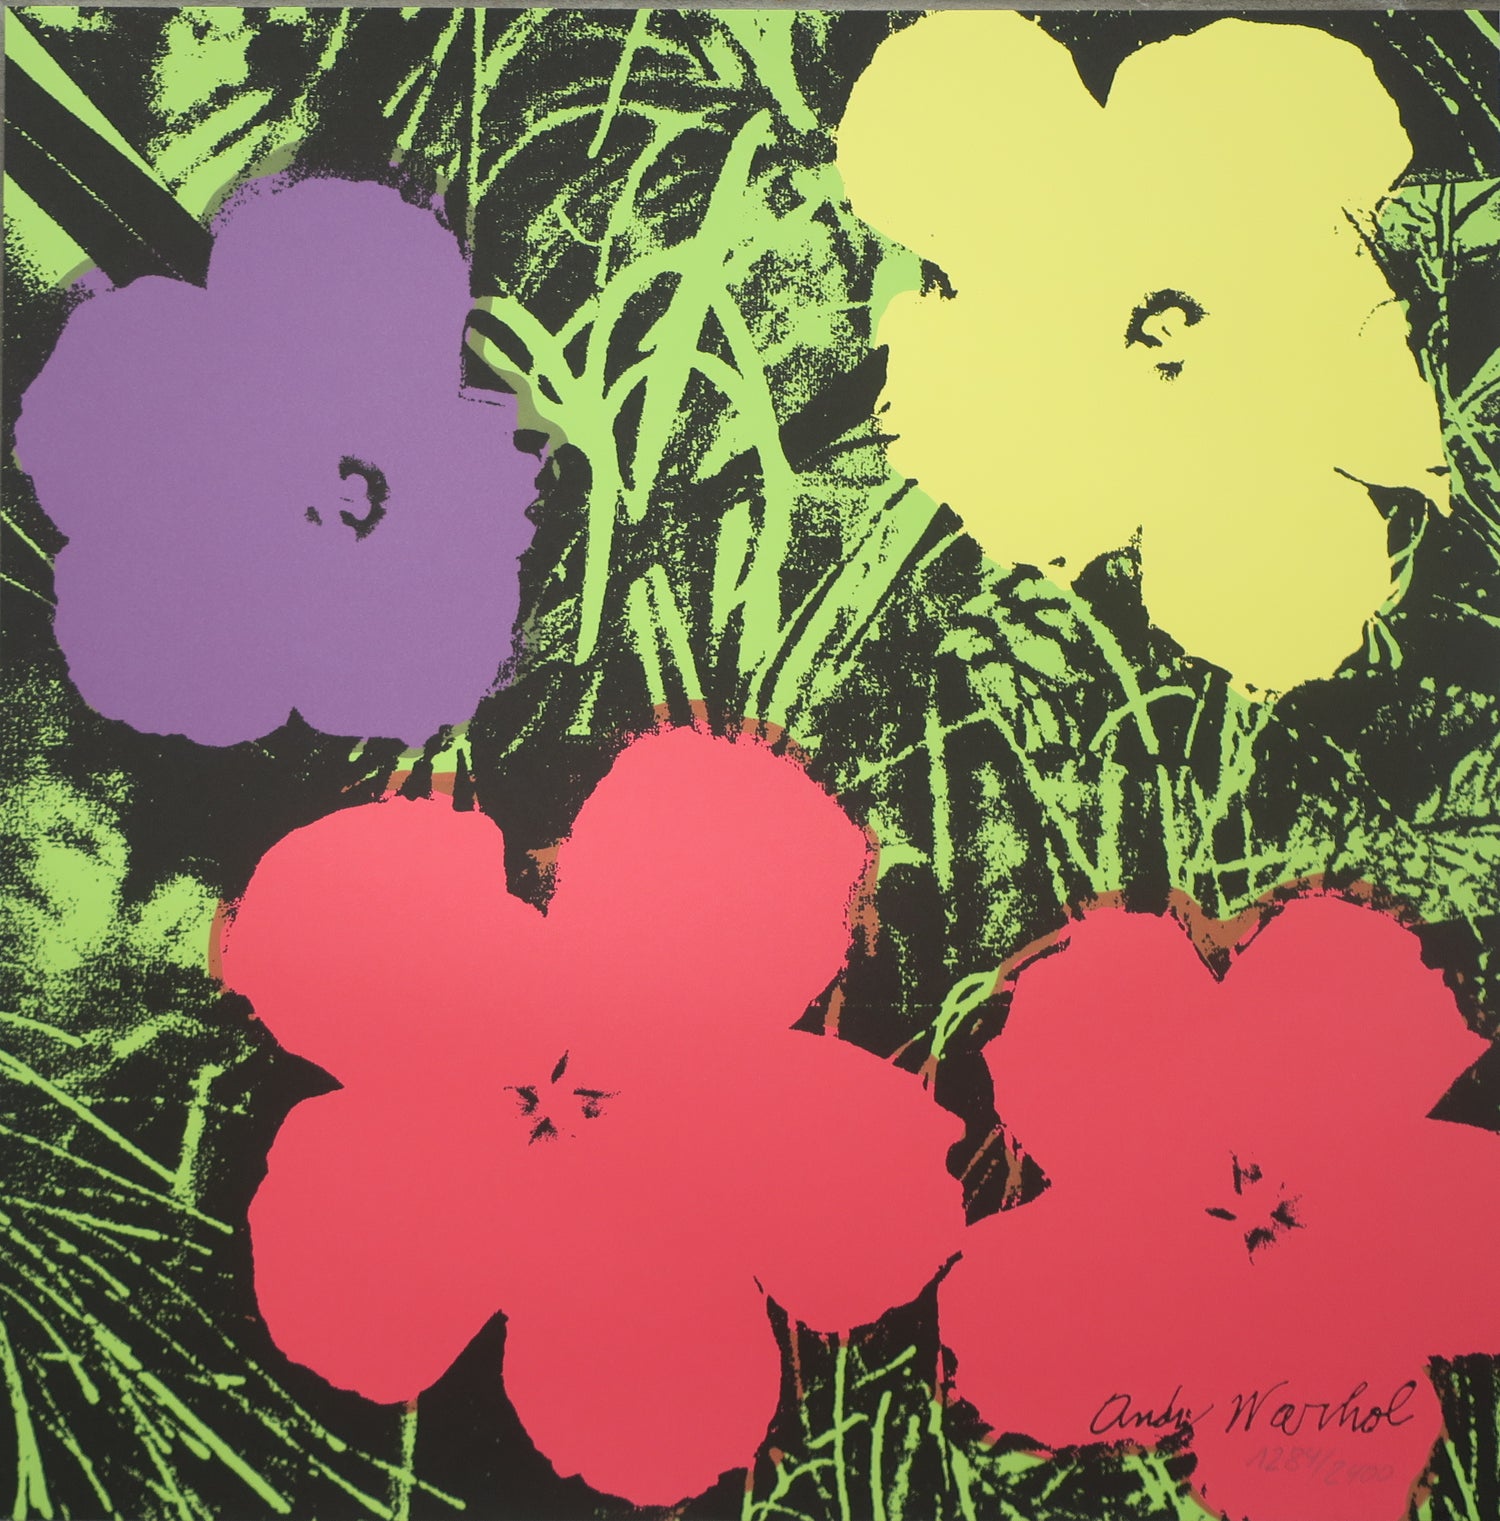 Andy Warhol Flowers 73 Lithograph